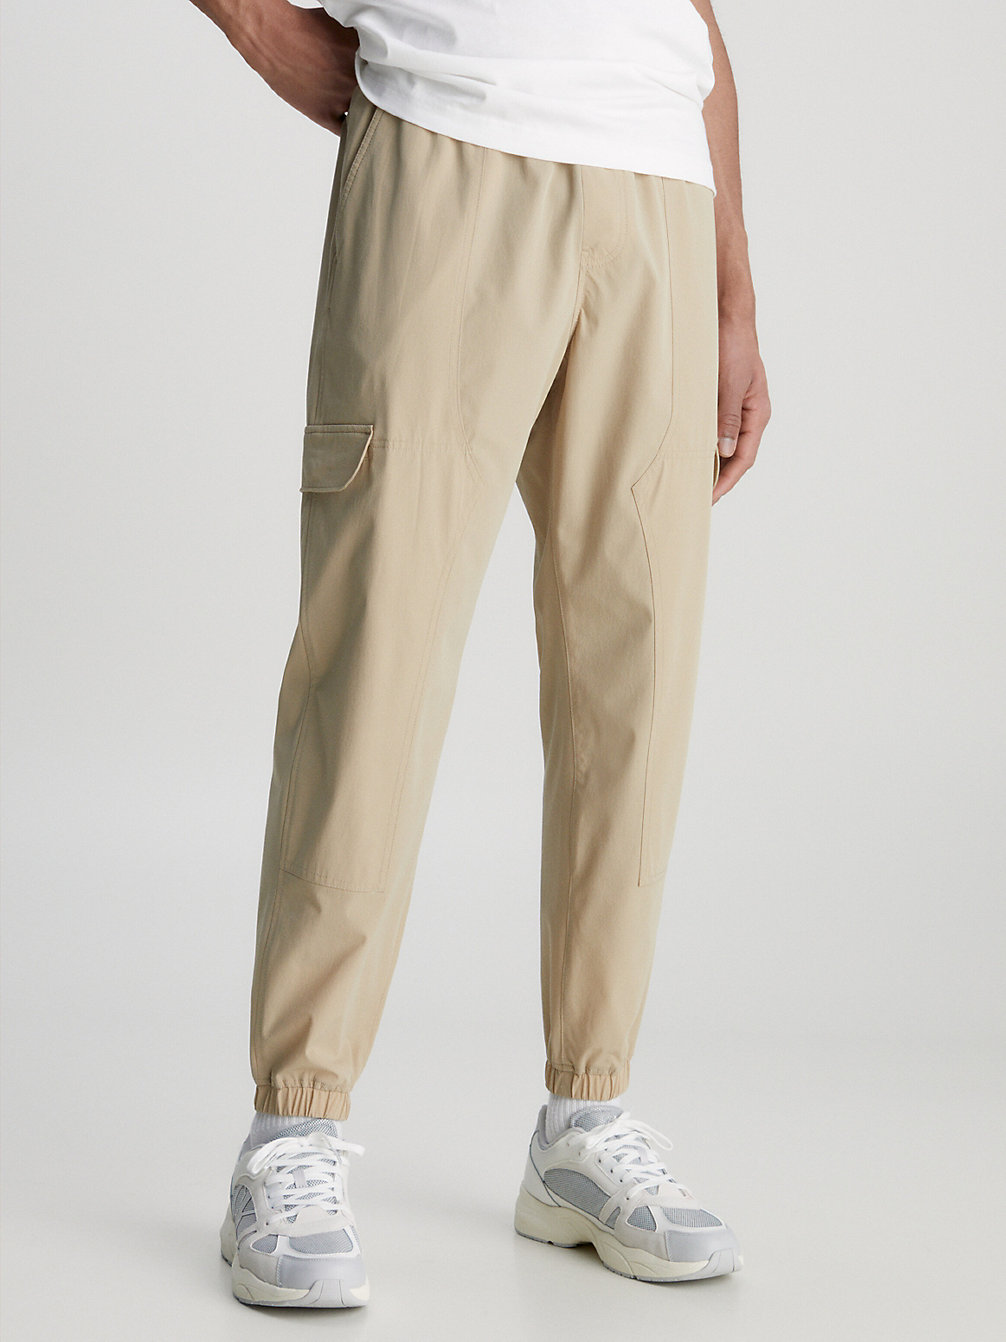 TRAVERTINE Recycled Nylon Tapered Cargo Pants undefined men Calvin Klein